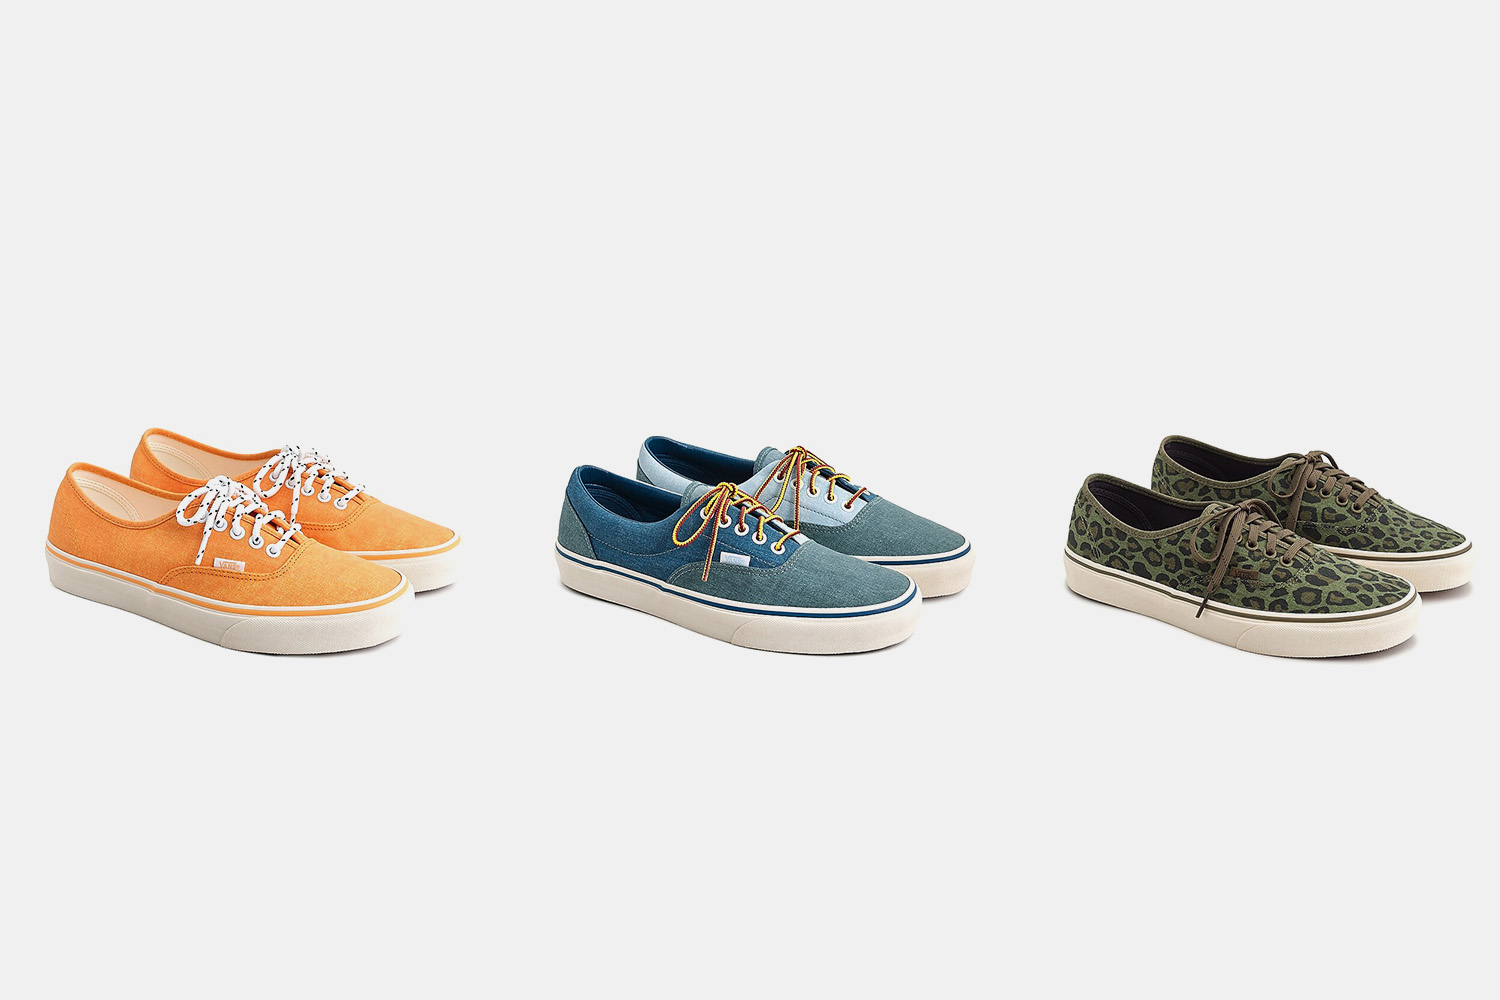 J.Crew Partnered With Vans for Five New 